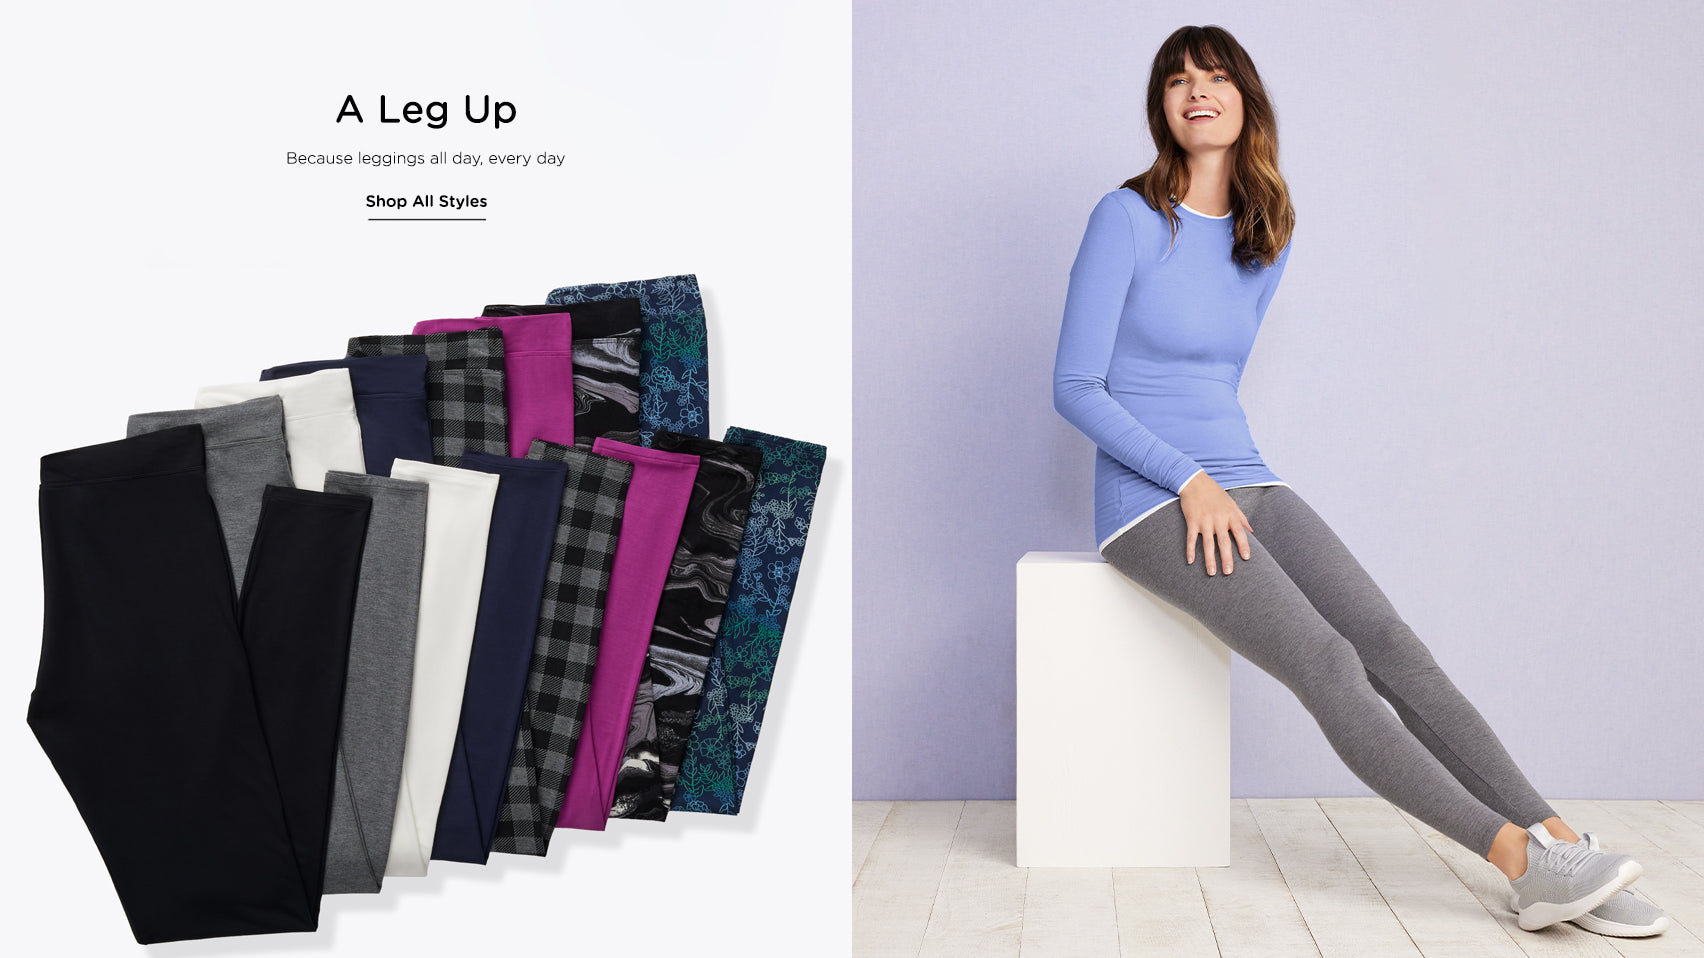 A leg up because leggings all day, every day, shop all styles. 